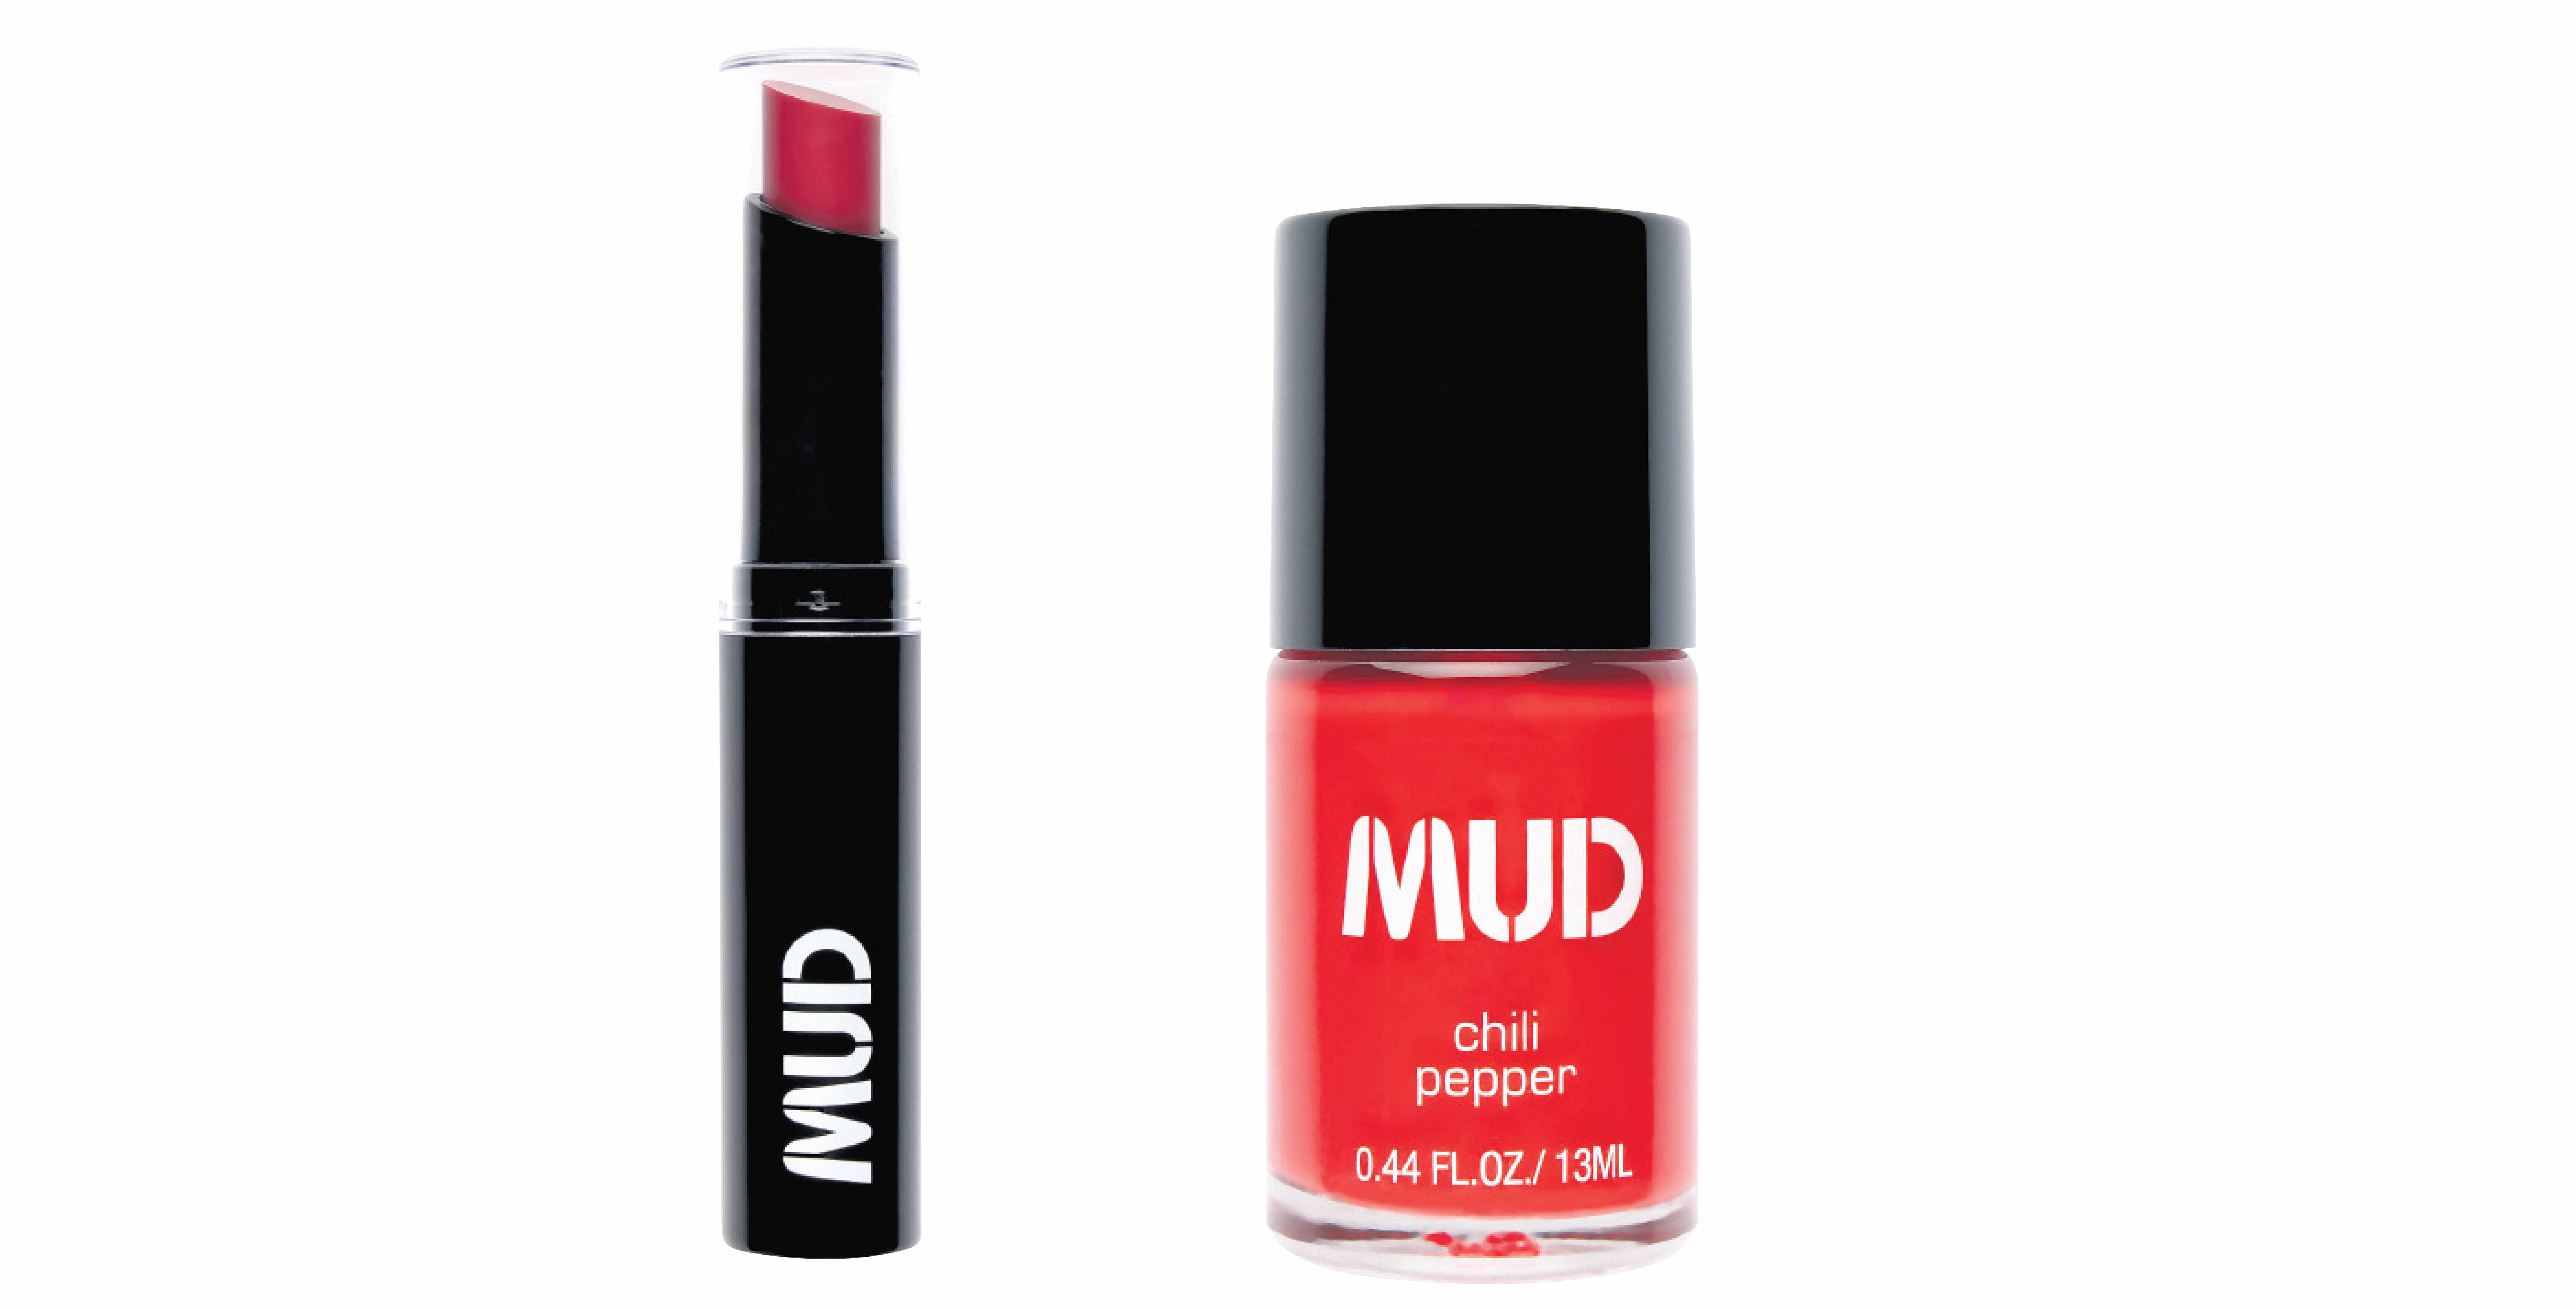 MUD (Makeup Design) is new at Countdown. Photo / Supplied.